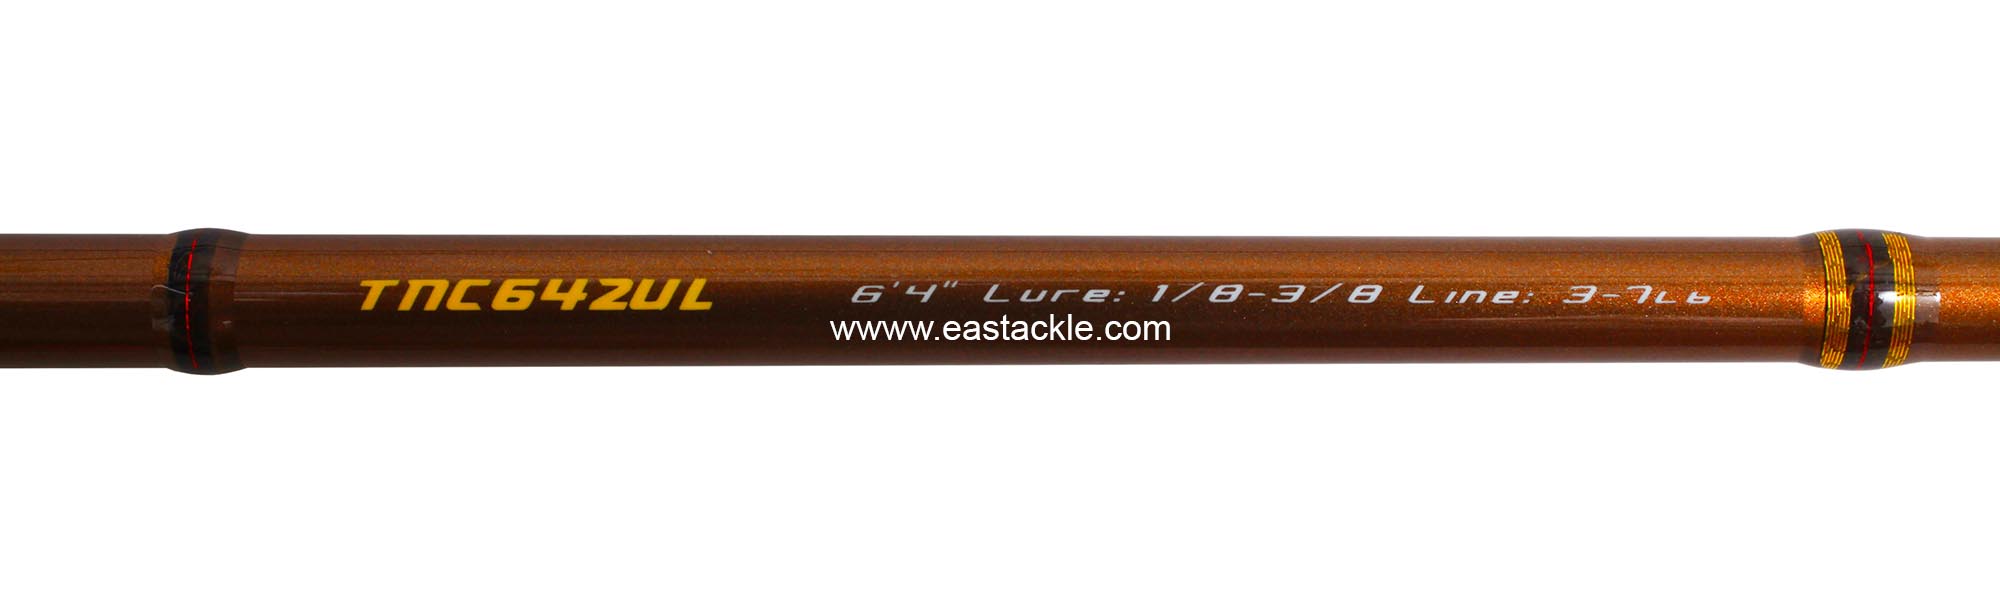 Storm - Teenie - TNC642UL - Bait Casting Rod - Blank Specifications (Top View) | Eastackle